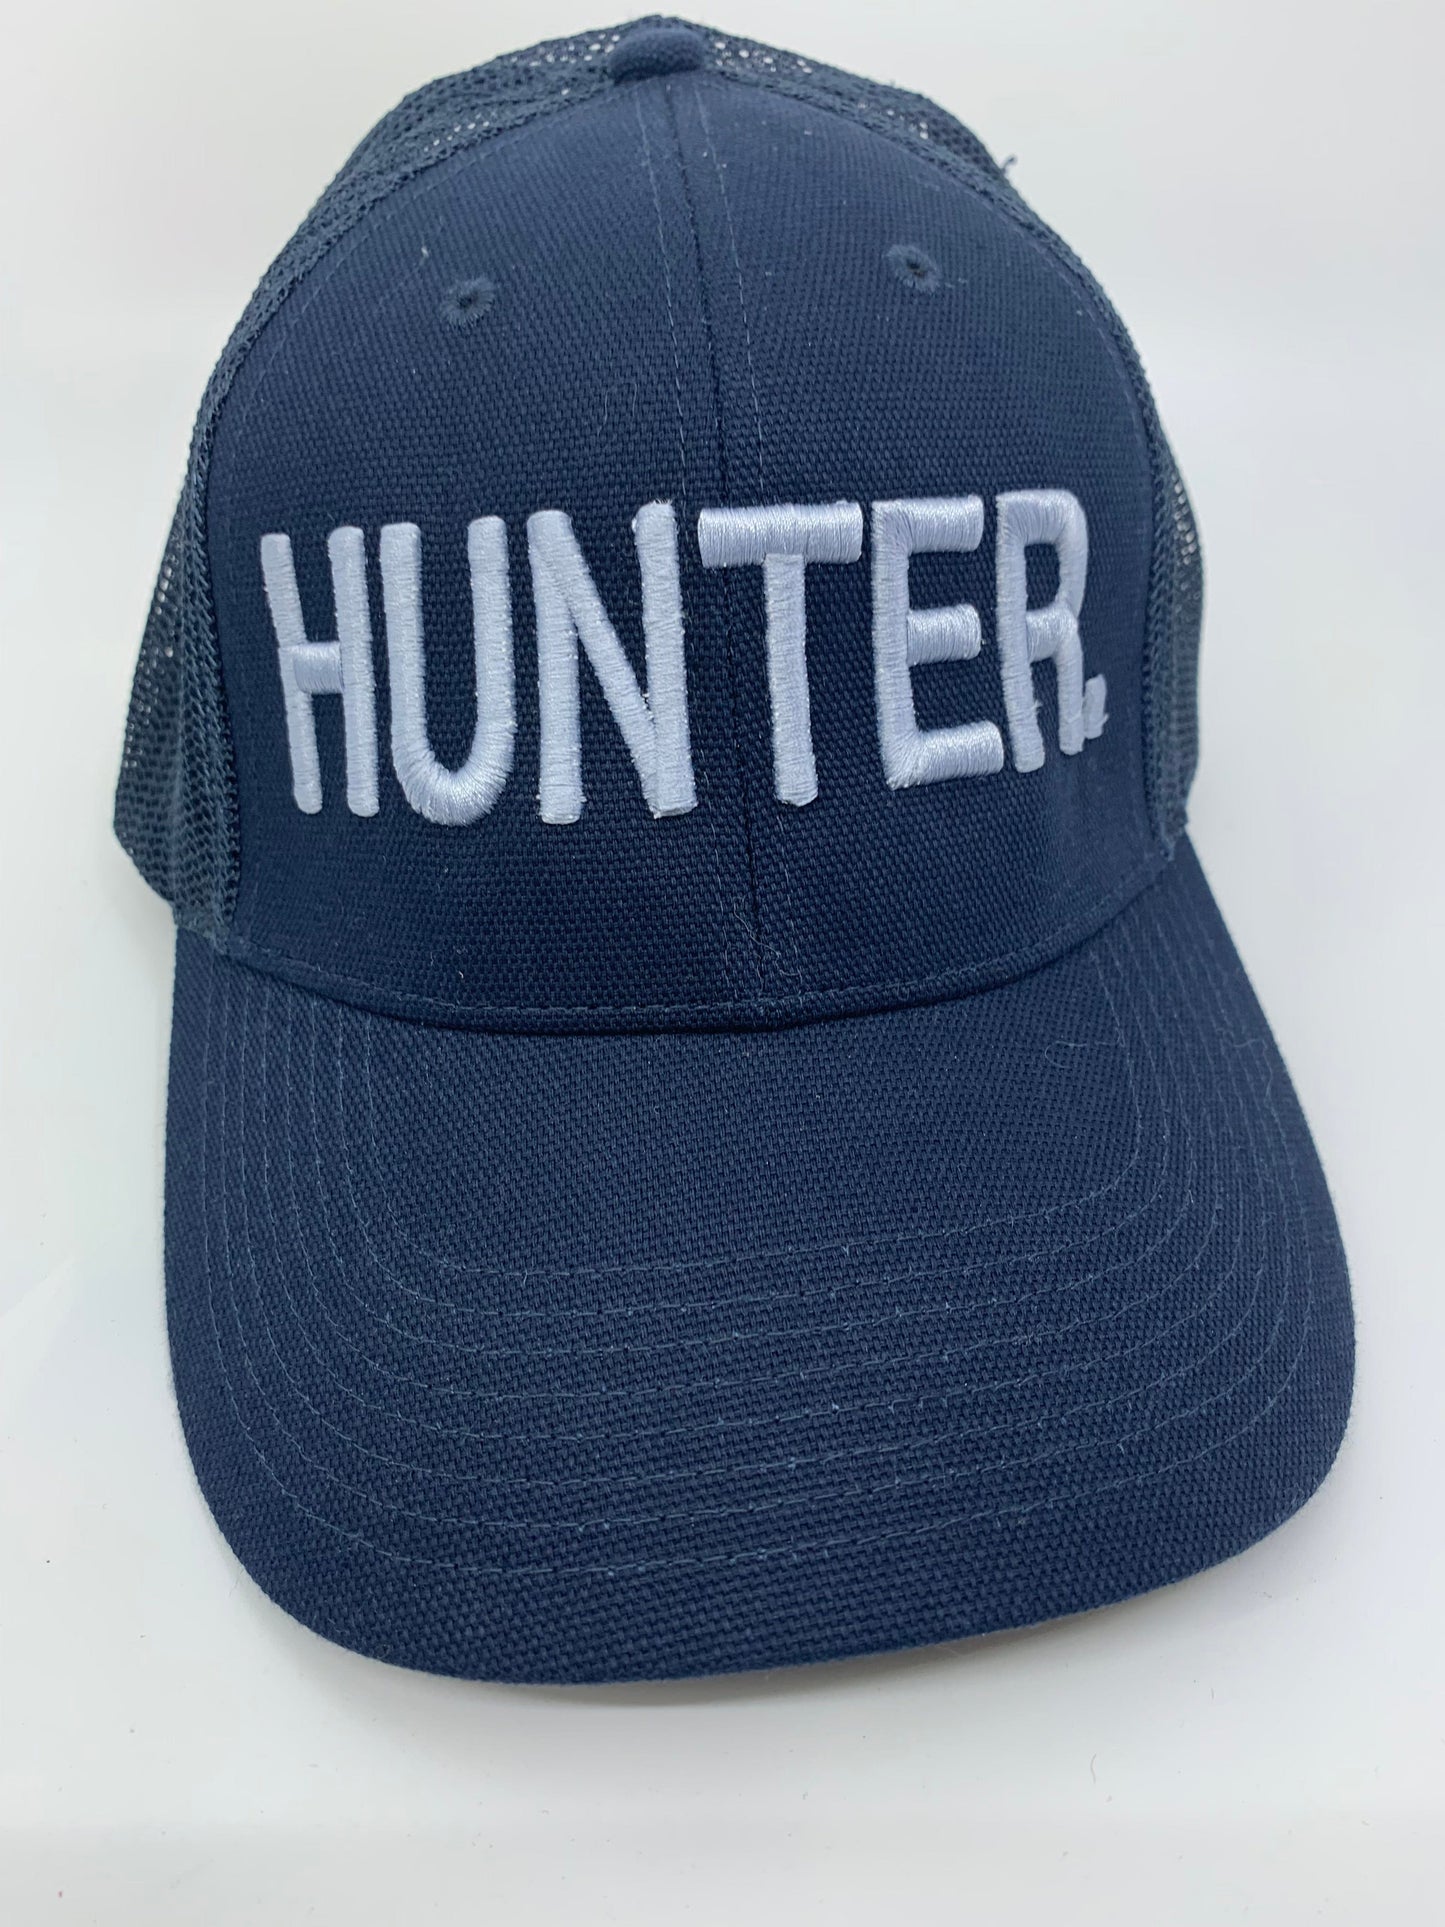 Equestrian Team Apparel Custom Team Hats Trucker Cap-HUNTER. equestrian team apparel online tack store mobile tack store custom farm apparel custom show stable clothing equestrian lifestyle horse show clothing riding clothes horses equestrian tack store